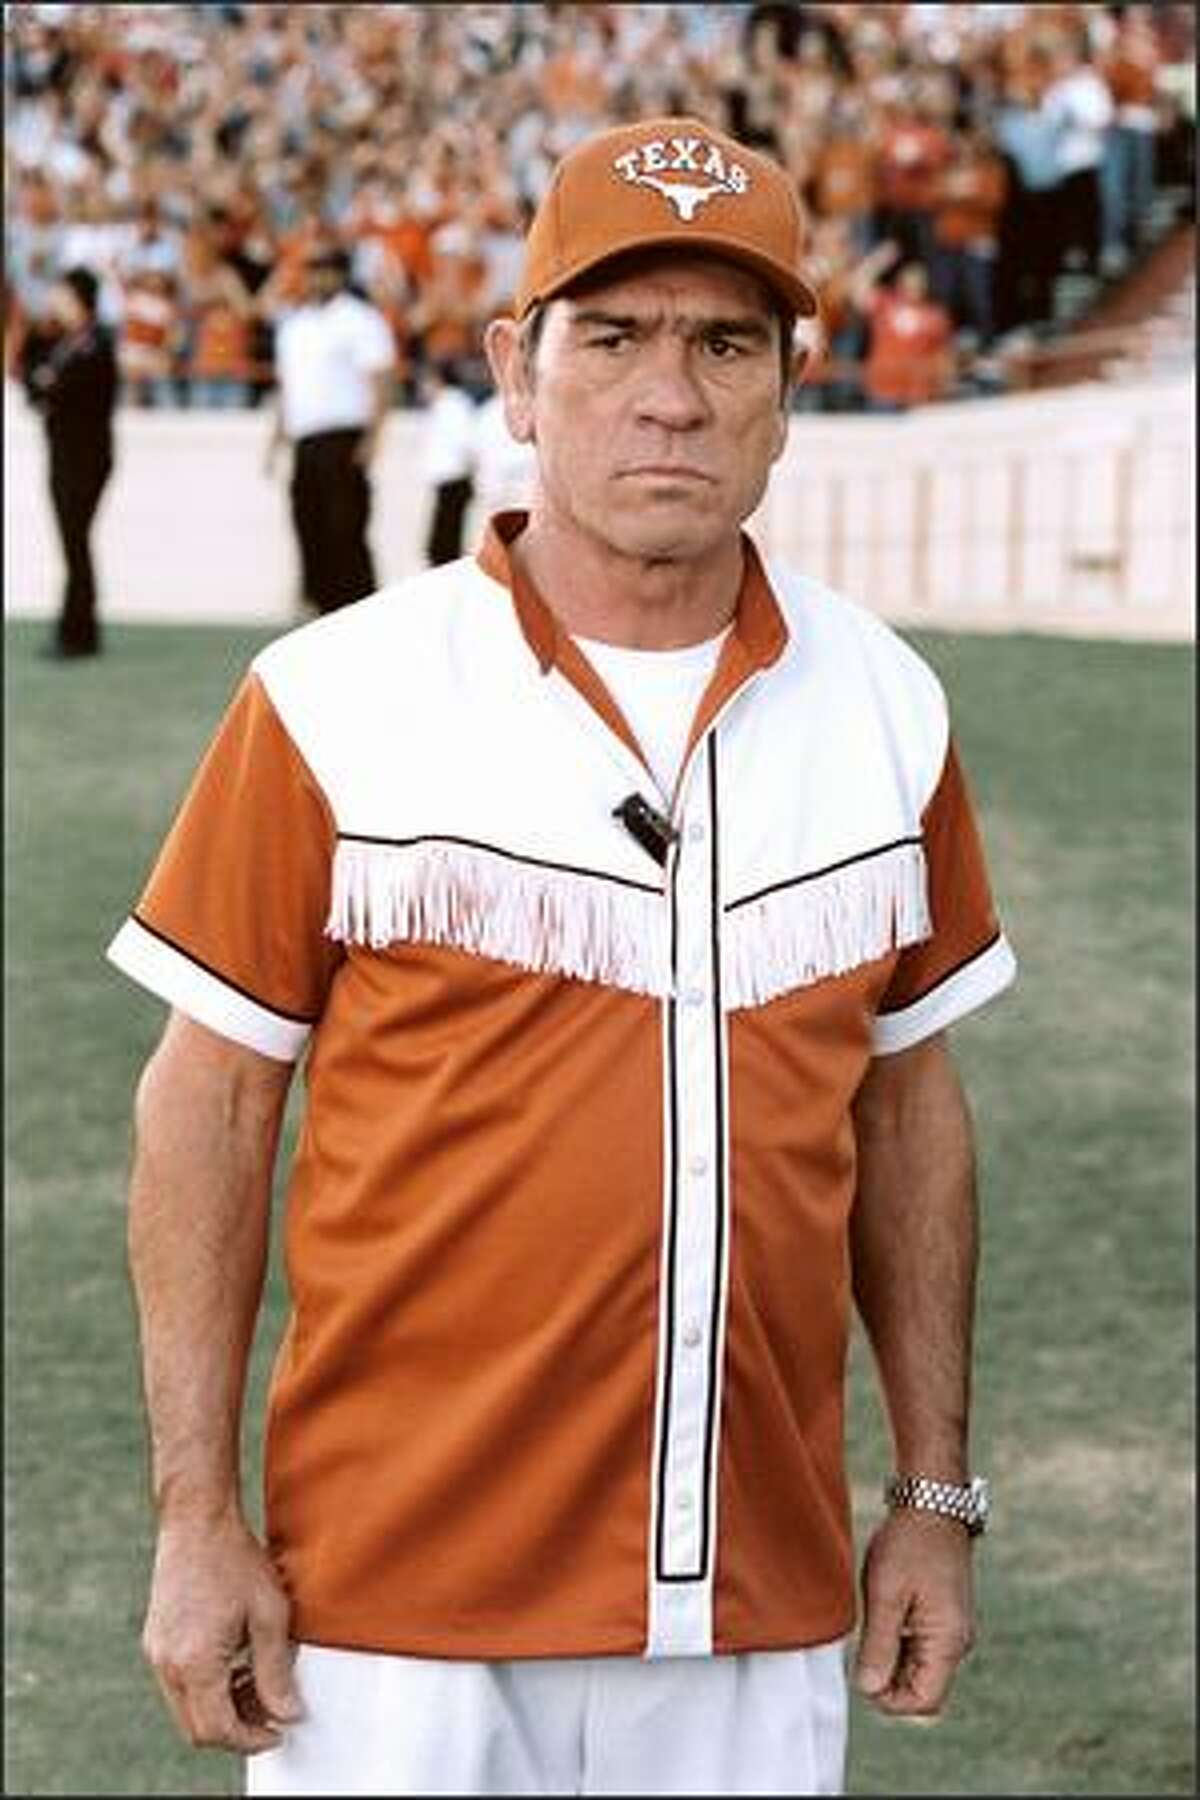 Tommy Lee Jones stars as by-the-book Texas Ranger Roland Sharp, who is assigned to protect the only witnesses to a crime -- a group of University of Texas cheerleaders -– by going undercover and moving in with the five uncontrollable coeds.